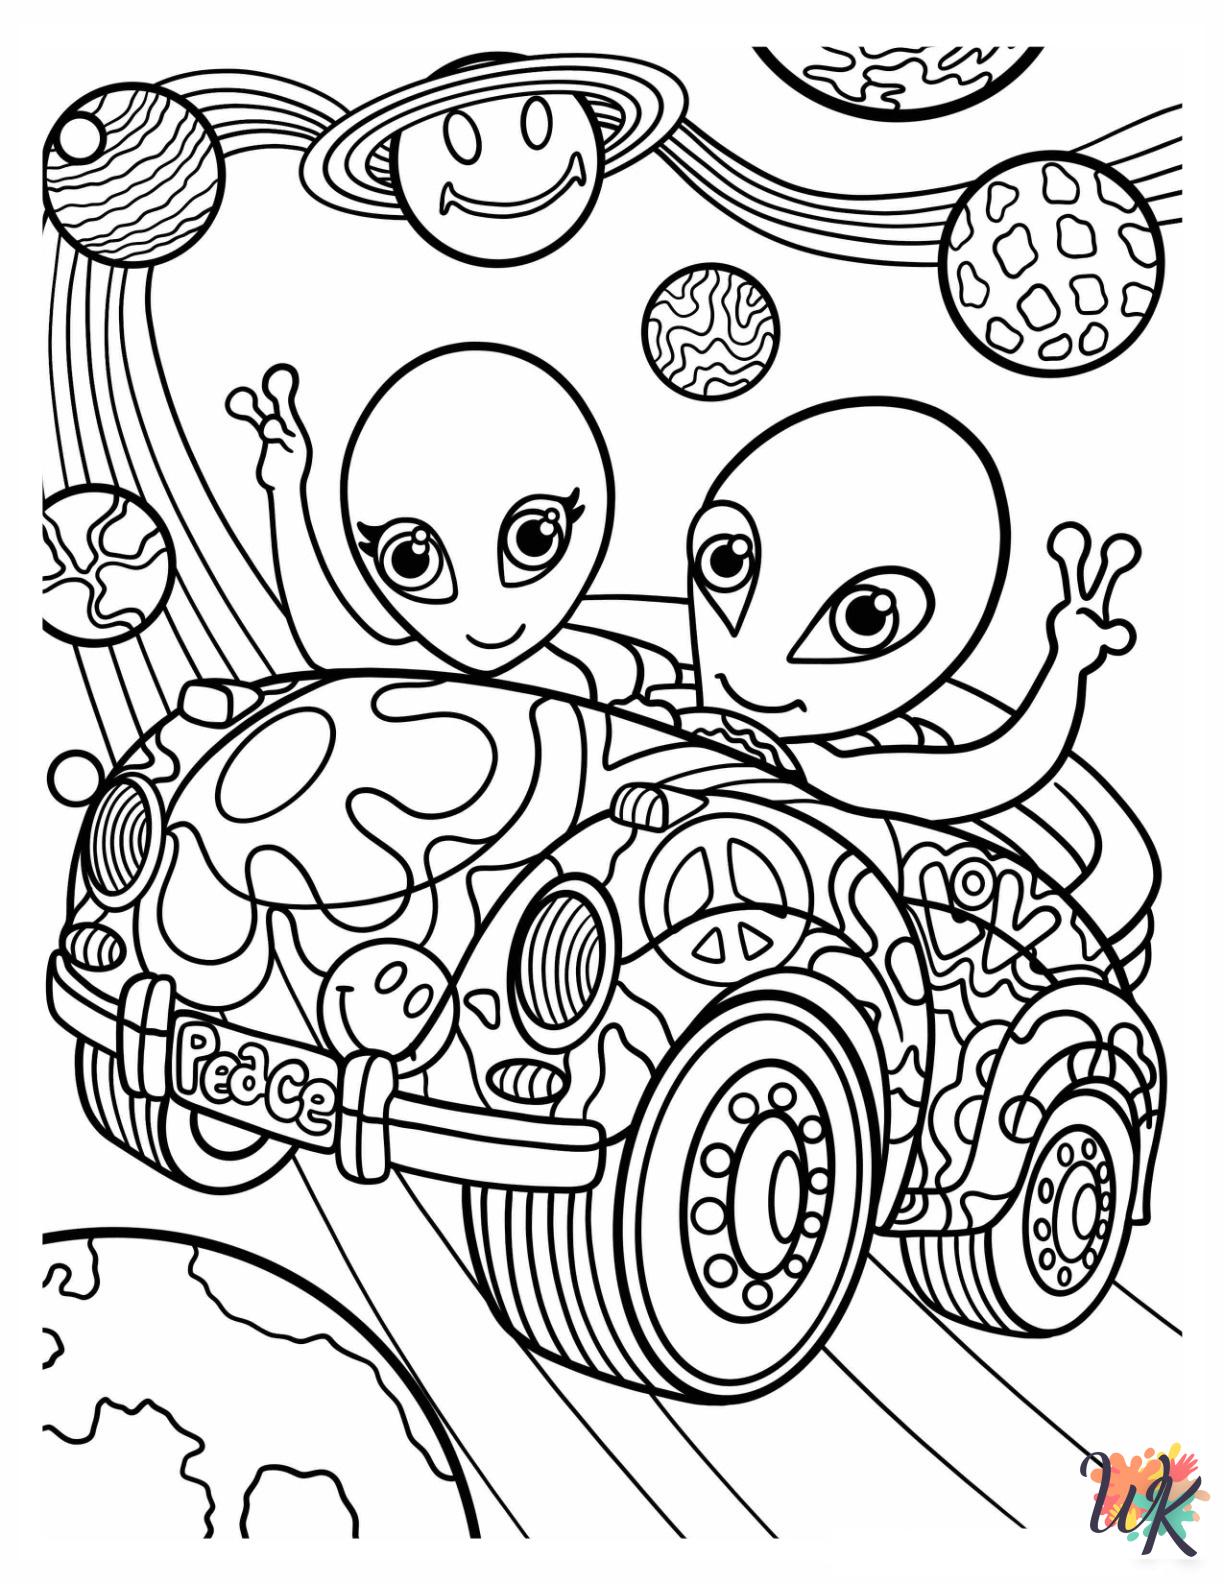 Lisa Frank coloring pages for adults easy 1